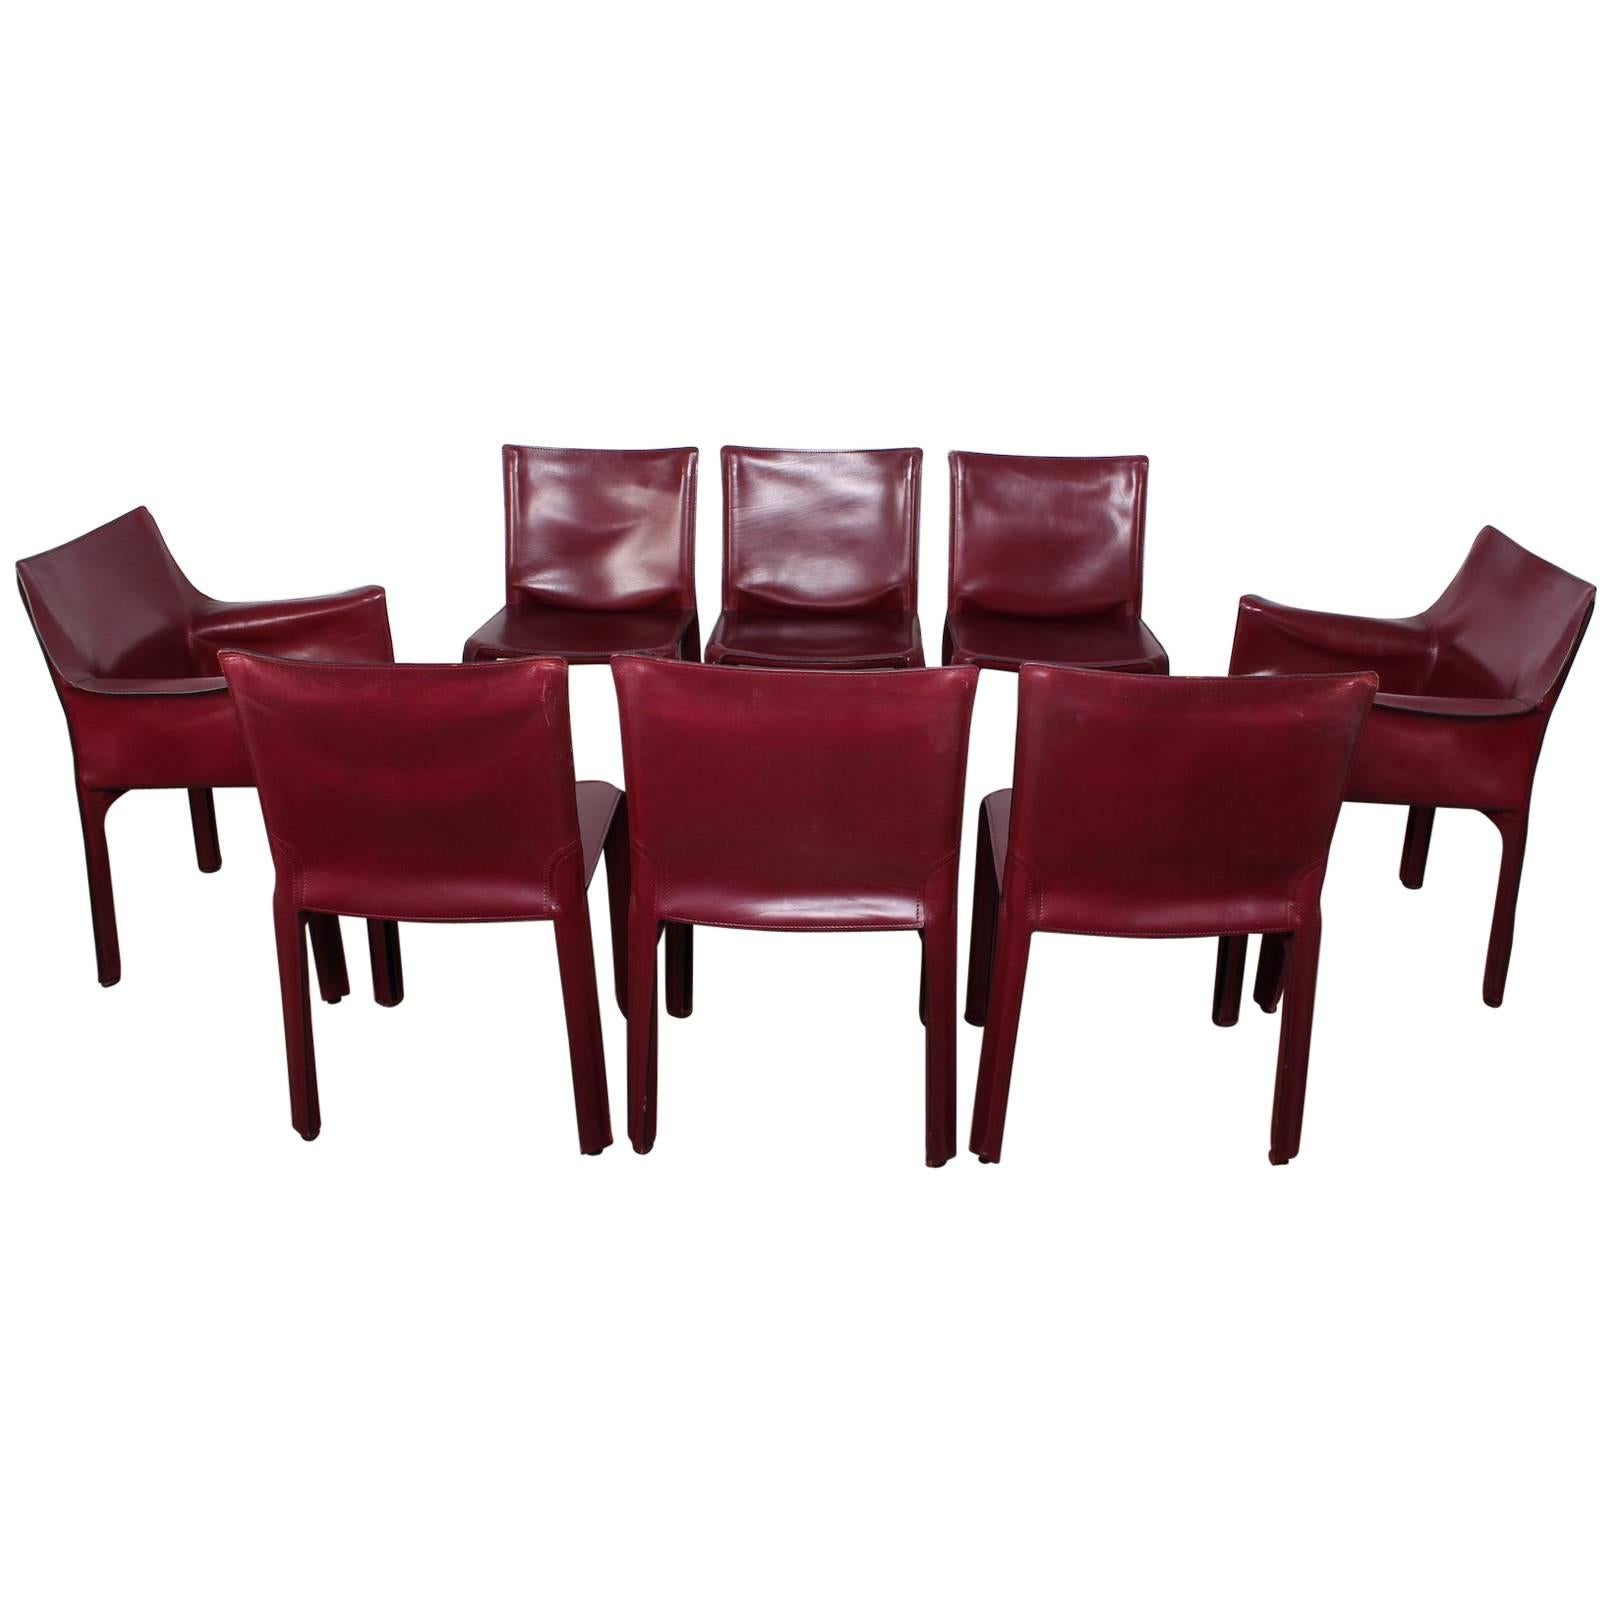 Set of Eight Cab Chairs by Mario Bellini for Cassina